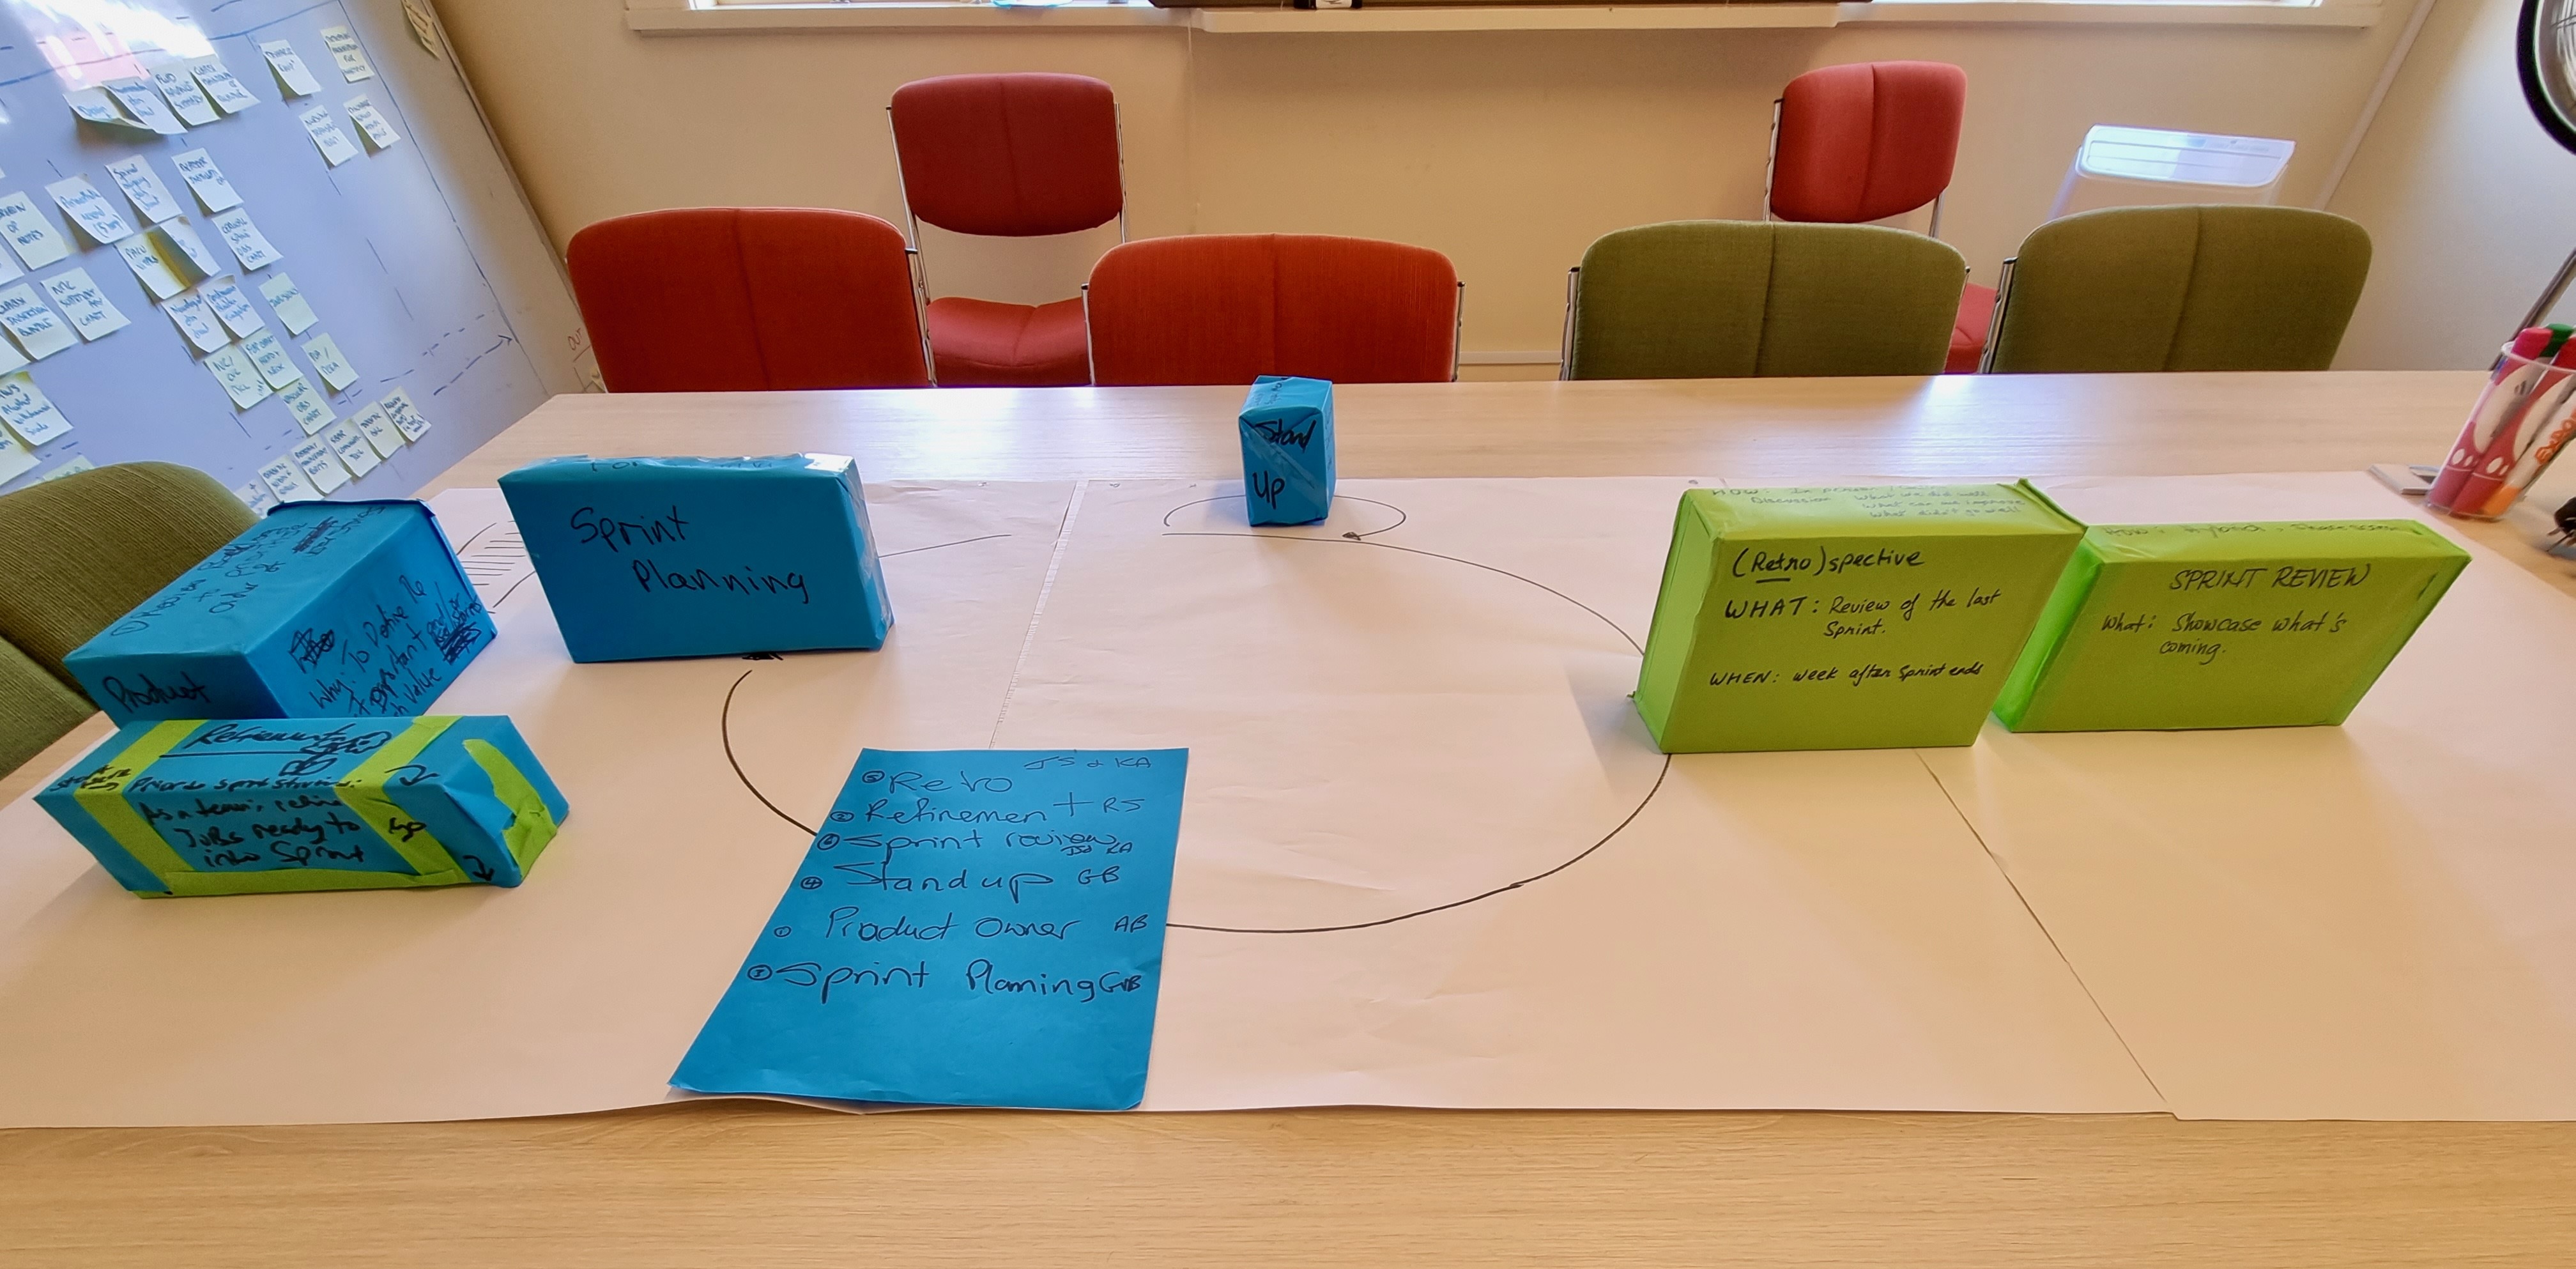 The table layout for a MOB teaching session